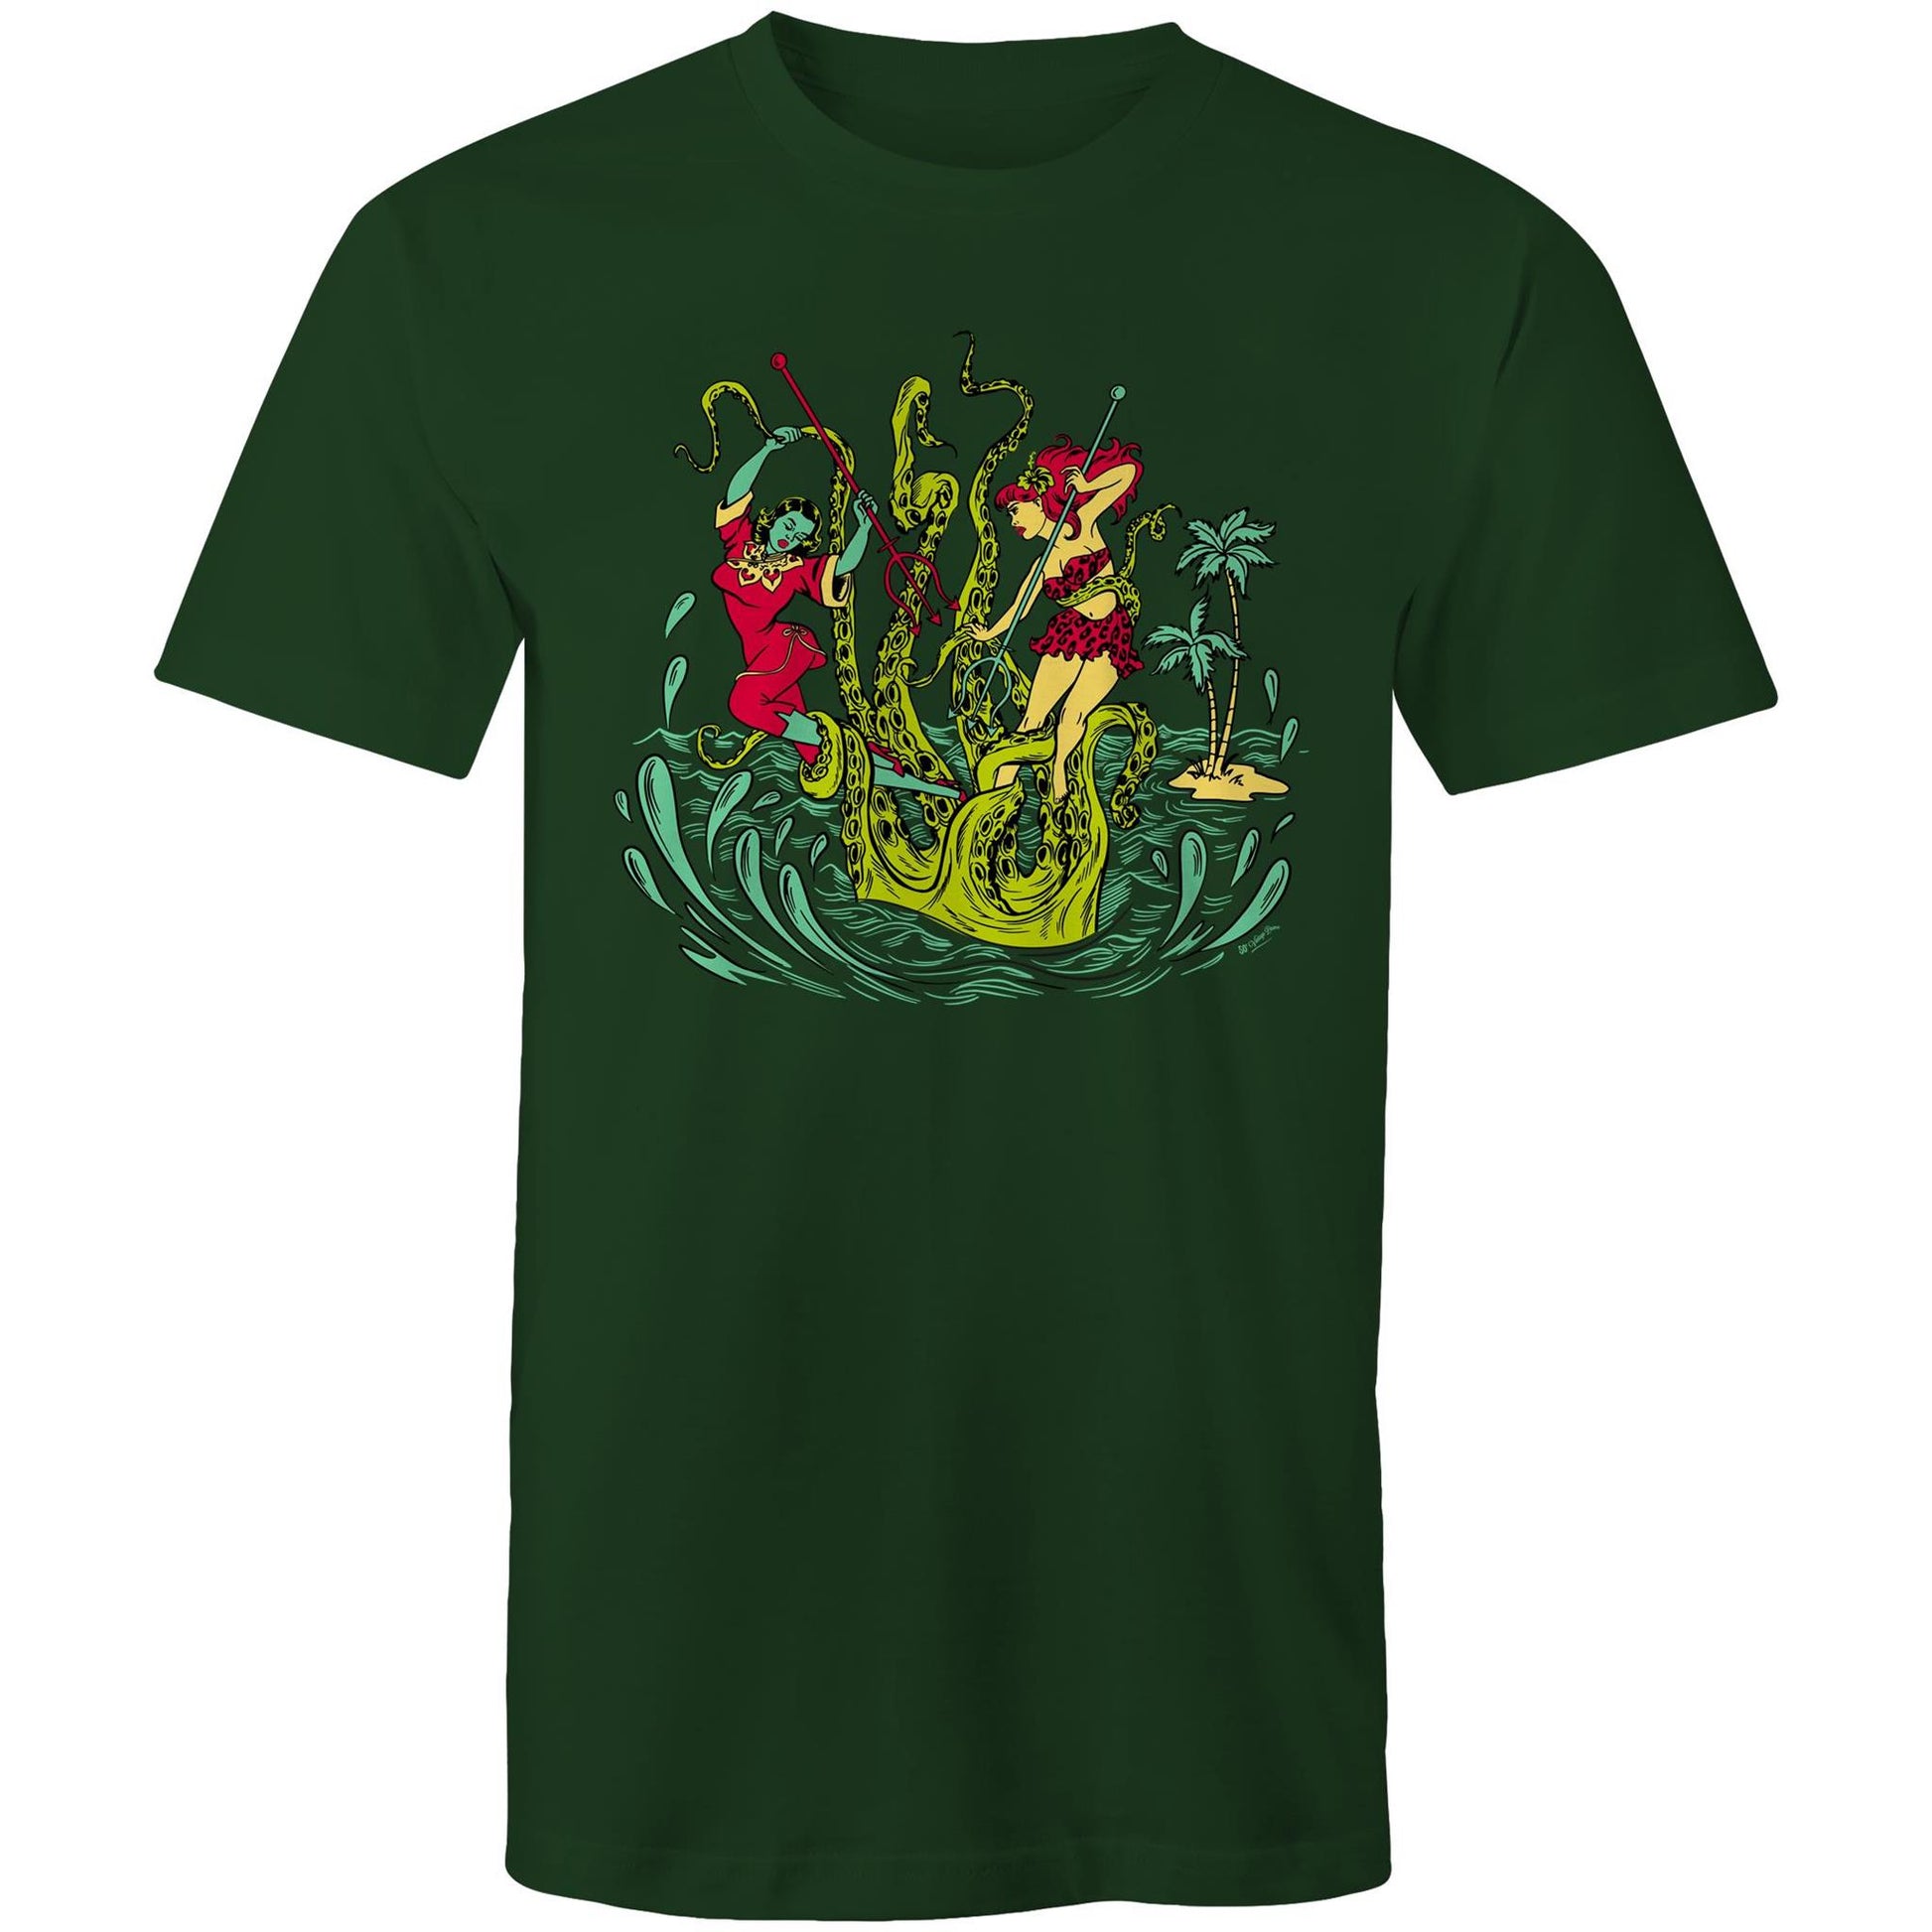 Unisex dark forest green tee shirt with a graphic of two women battling a giant Kracken